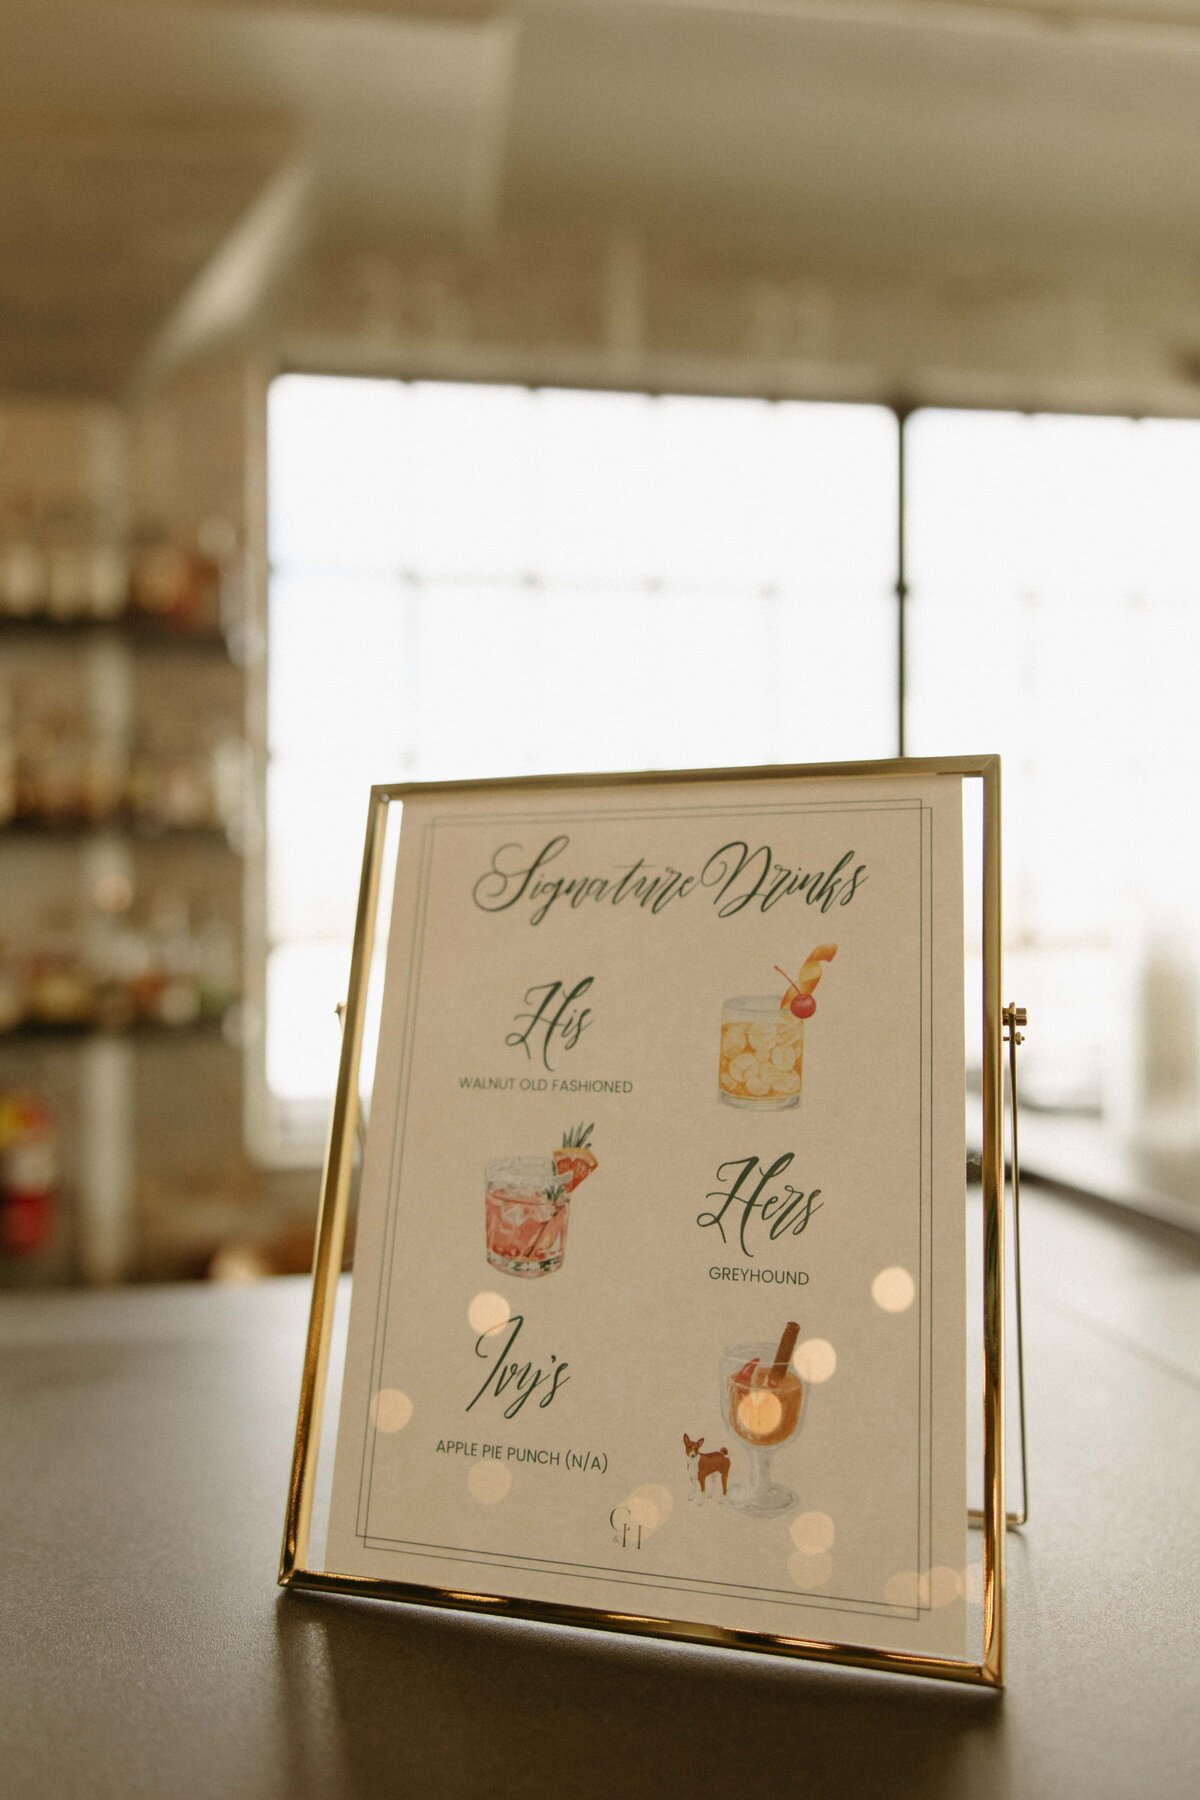 A menu titled "signature drinks" on a stand, displaying cocktail options for Iowa weddings, placed on a table in a softly lit indoor setting.